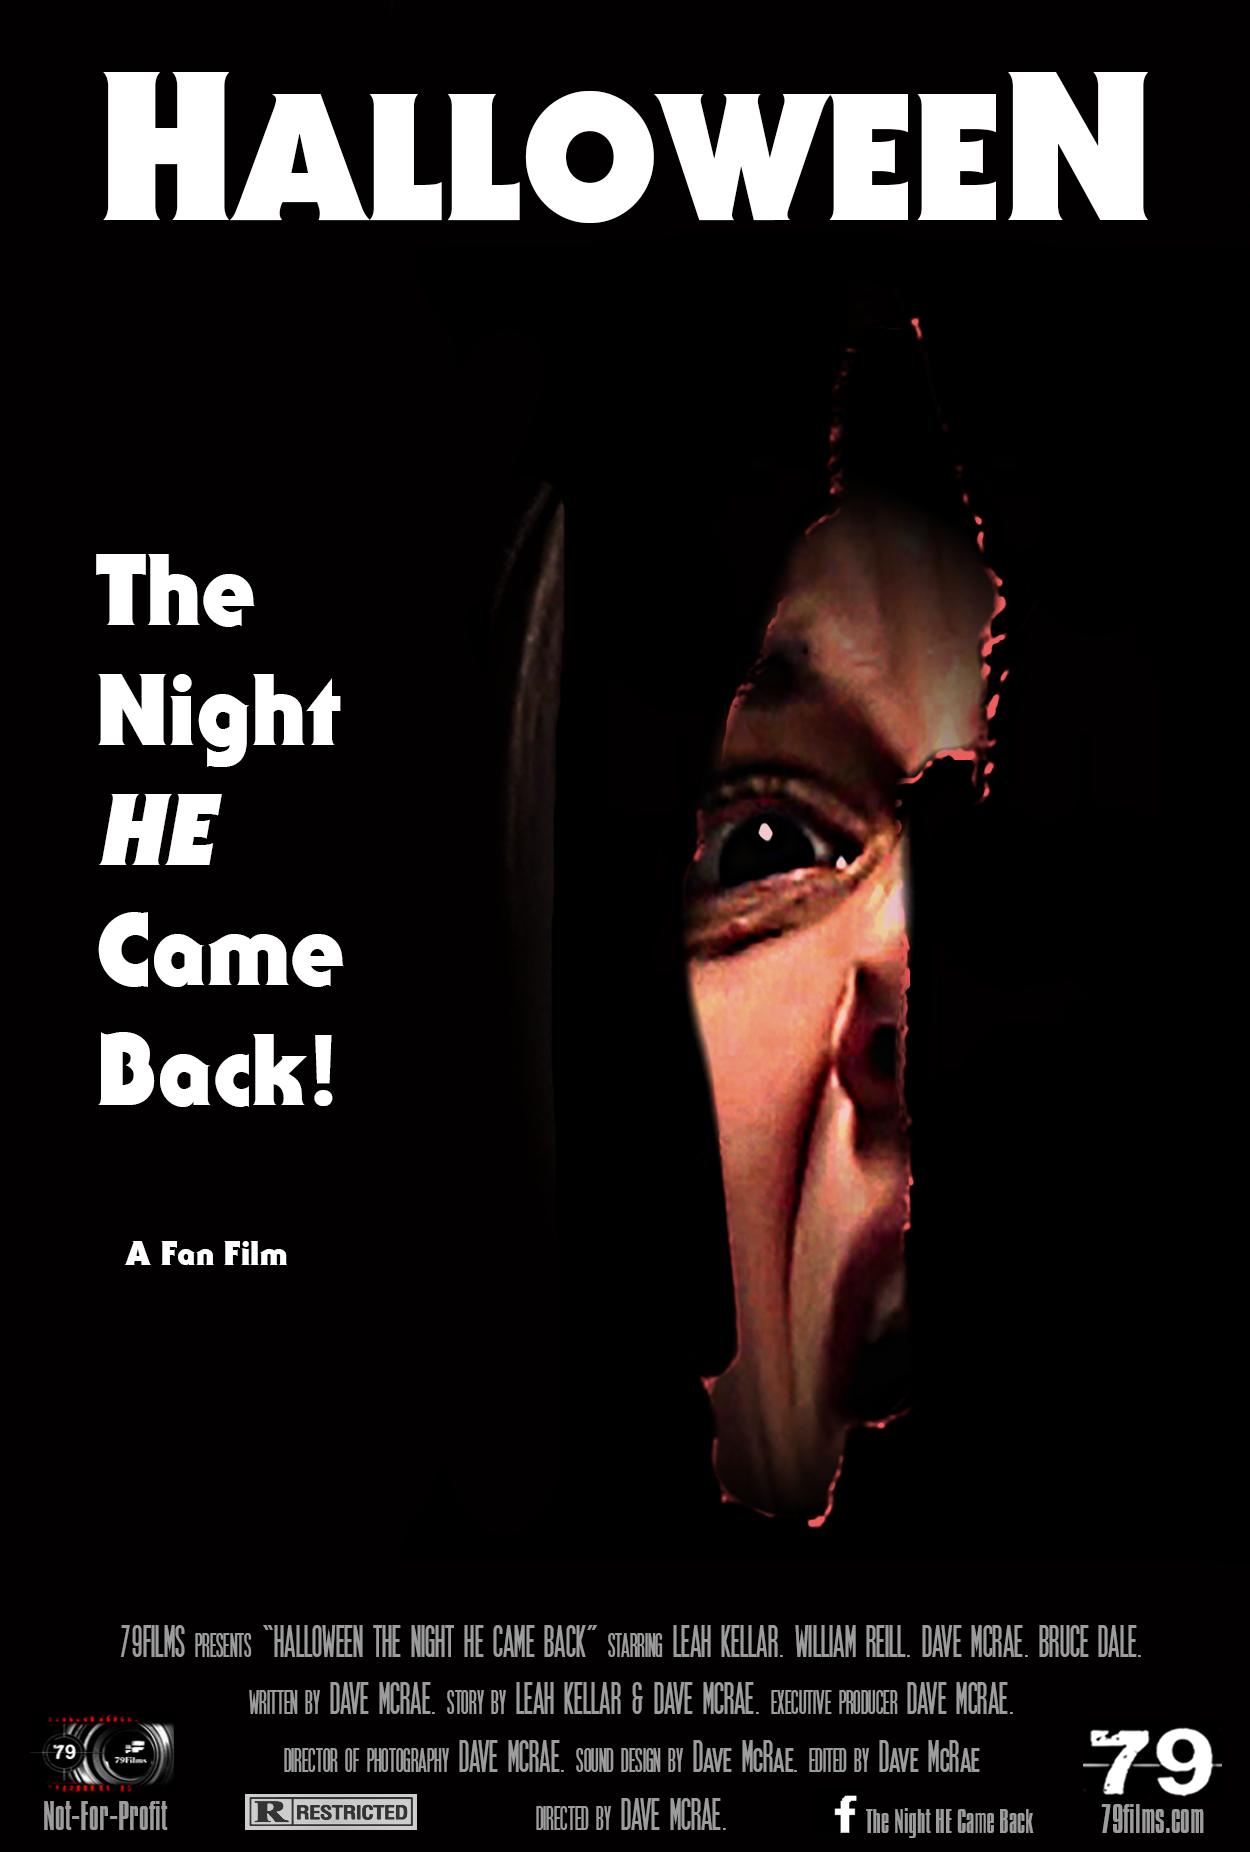 Halloween: The Night HE Came Back